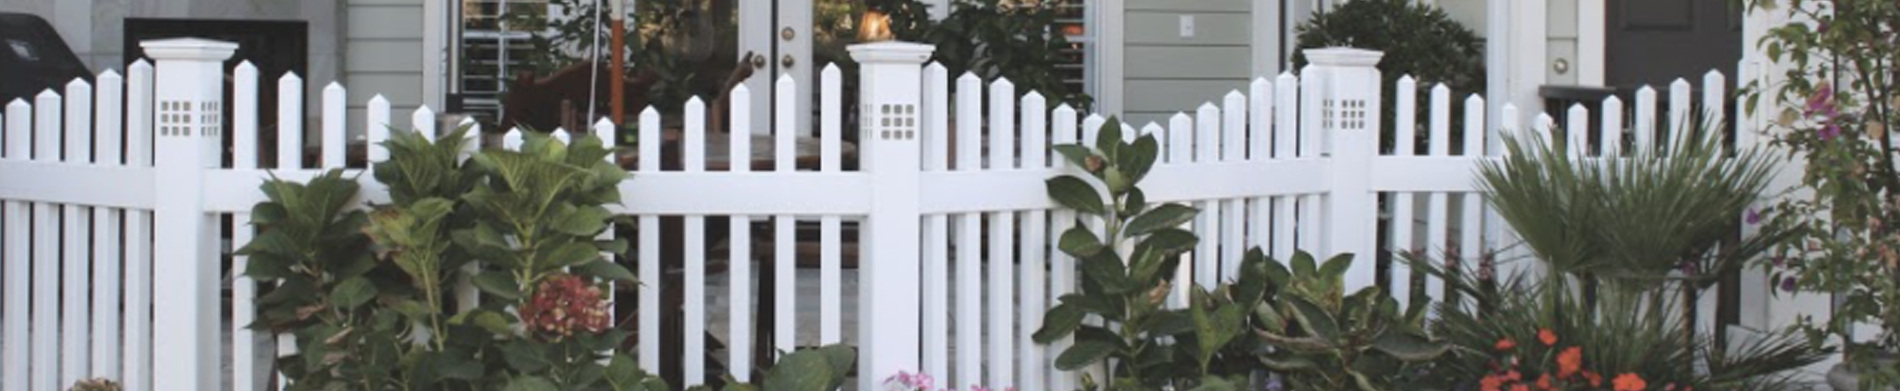 Choose Vinyl Fences Over The Wooden Ones